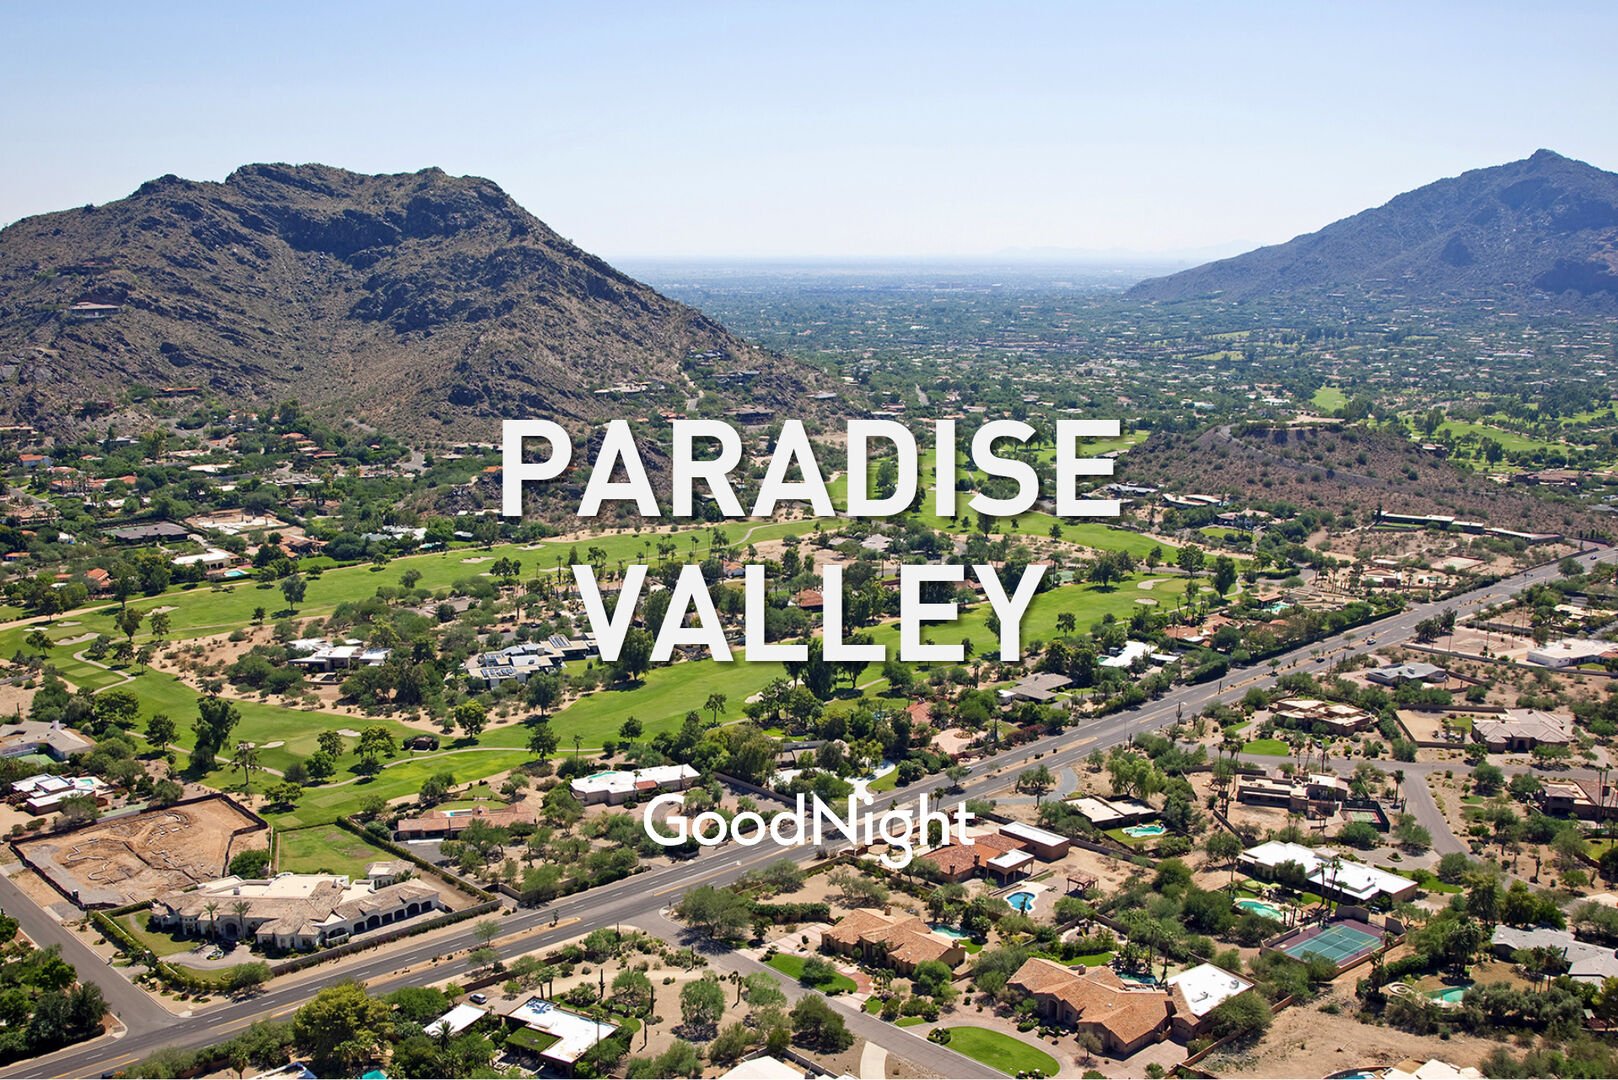 6 minutes to Paradise Valley